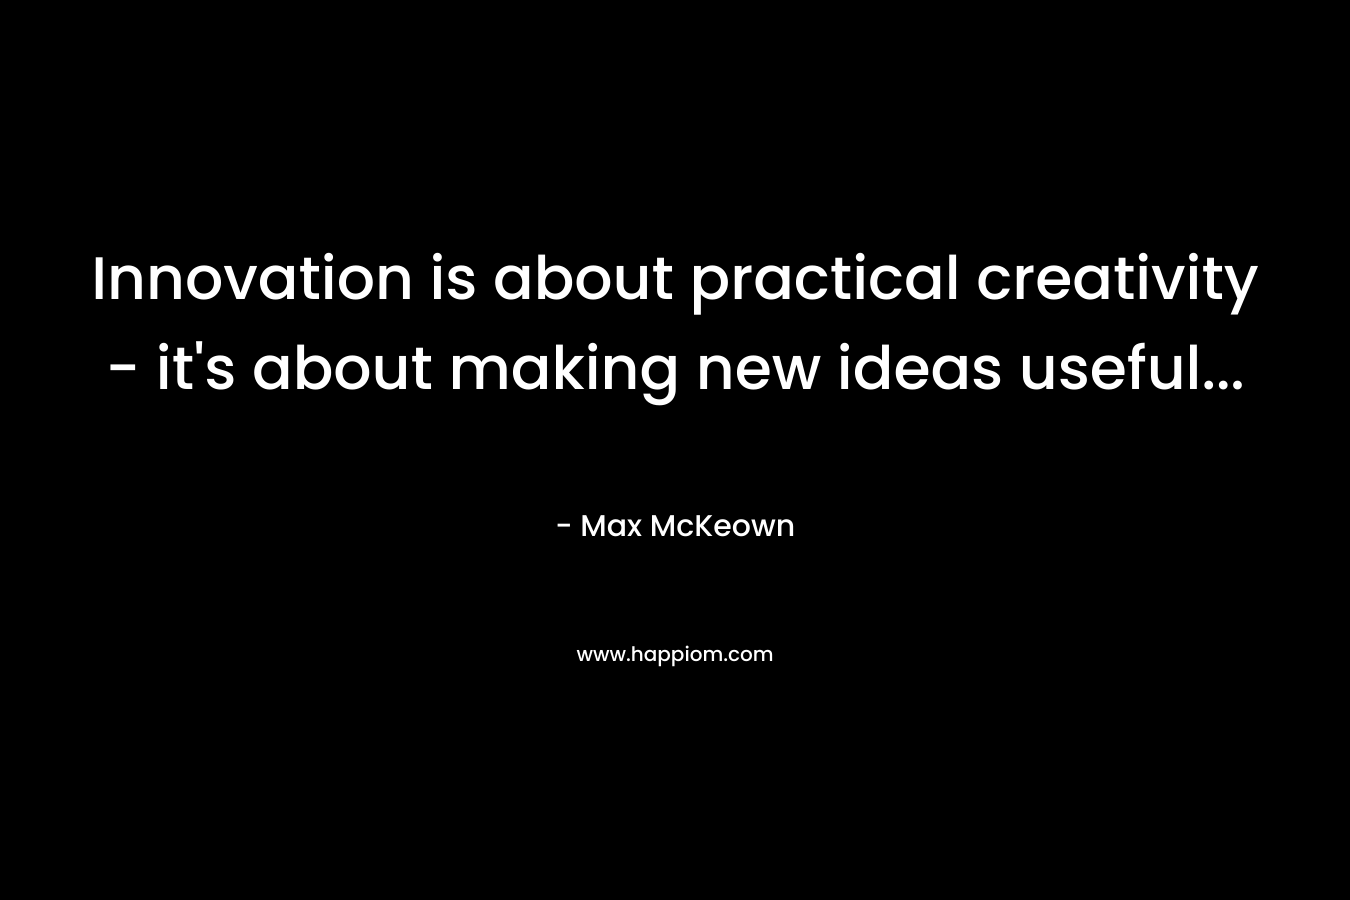 Innovation is about practical creativity - it's about making new ideas useful...